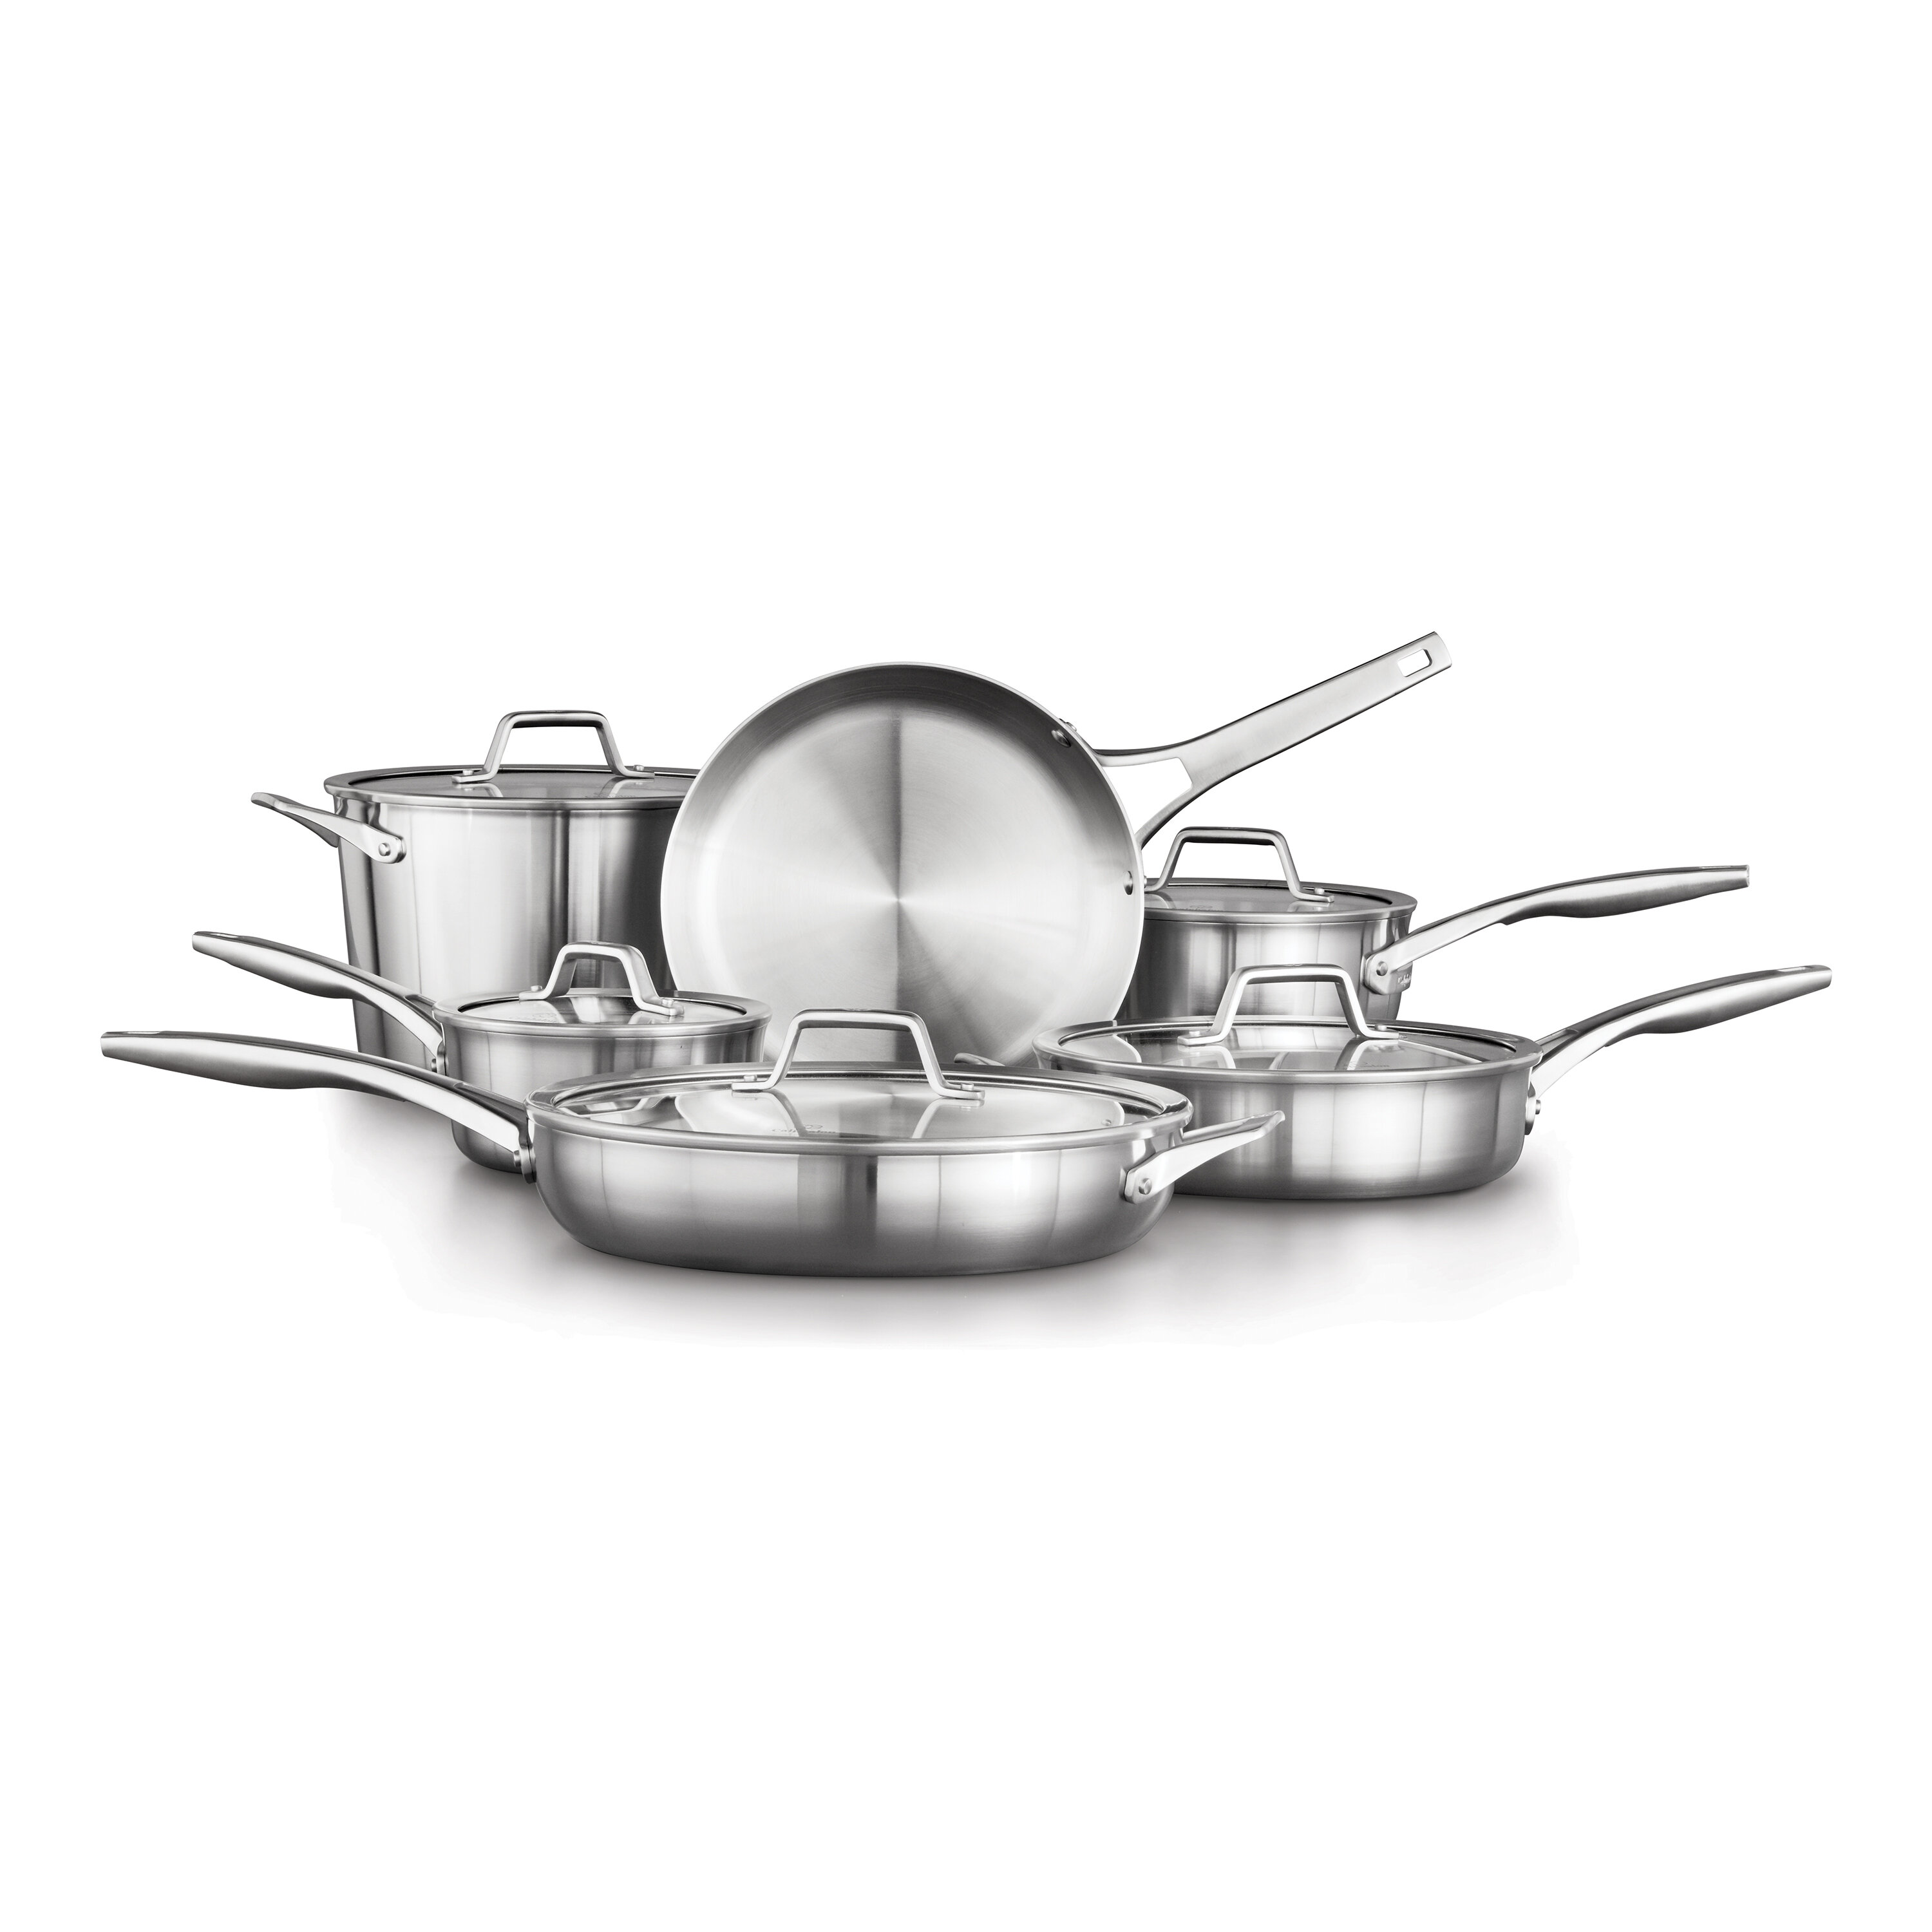 Select by Calphalon 8pc Stainless Steel Cookware Set for sale online 